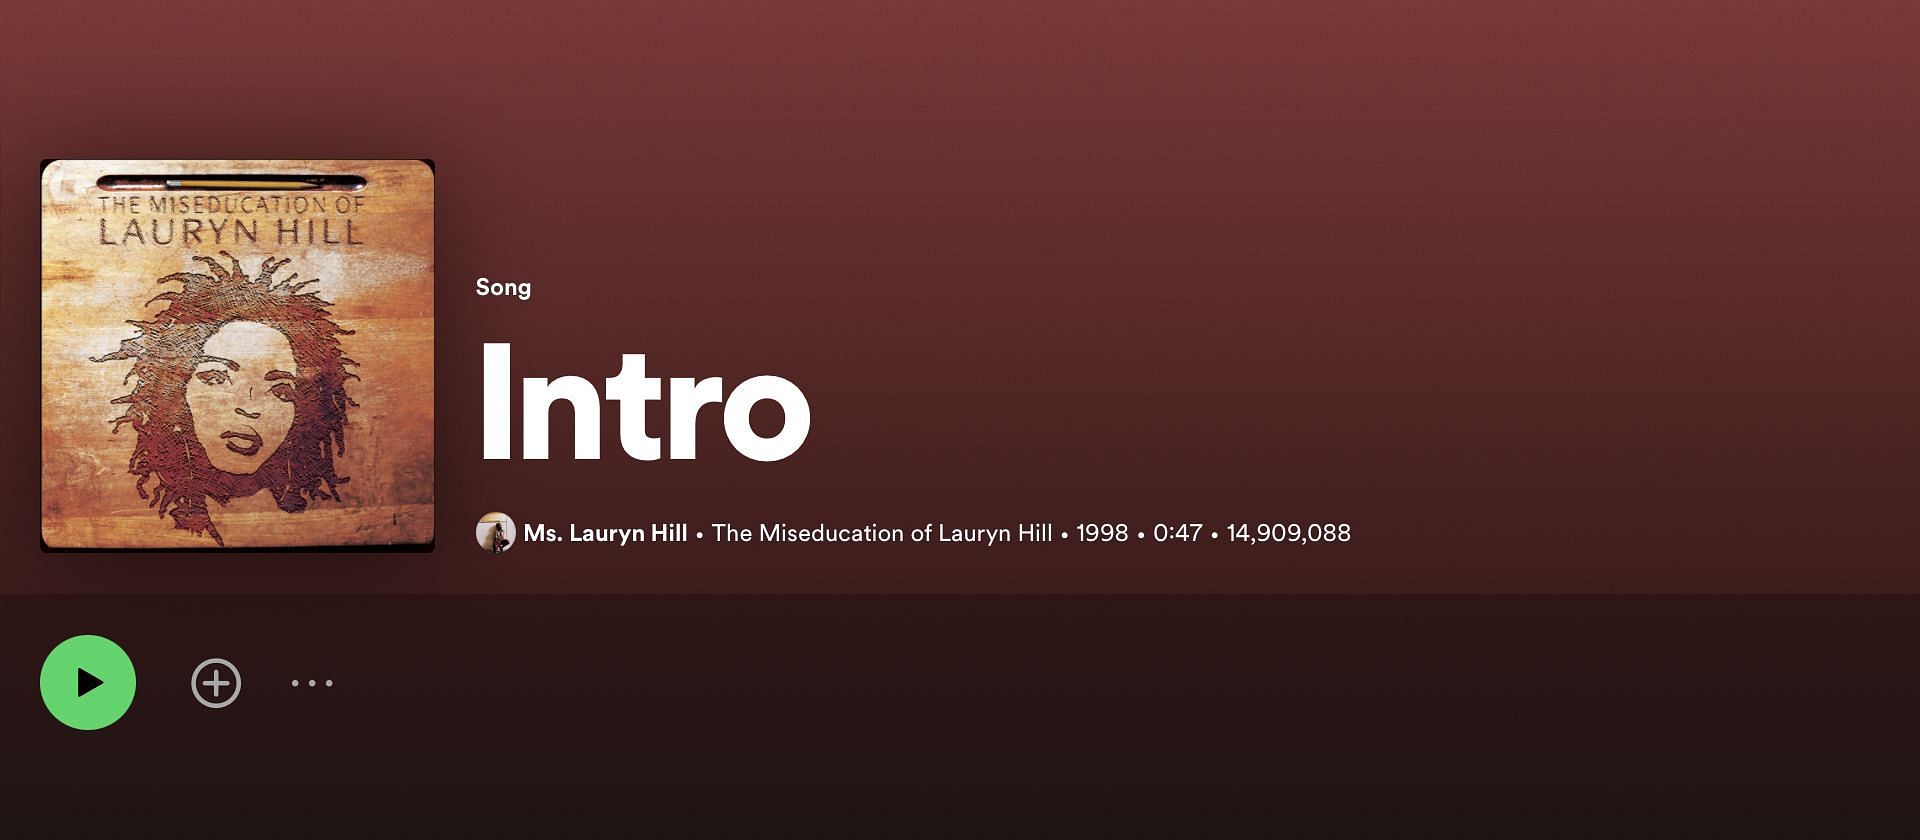 Track 1 of Lauryn&#039;s debut album &#039;The Miseducation of Lauryn Hill&#039; (Image via Spotify)